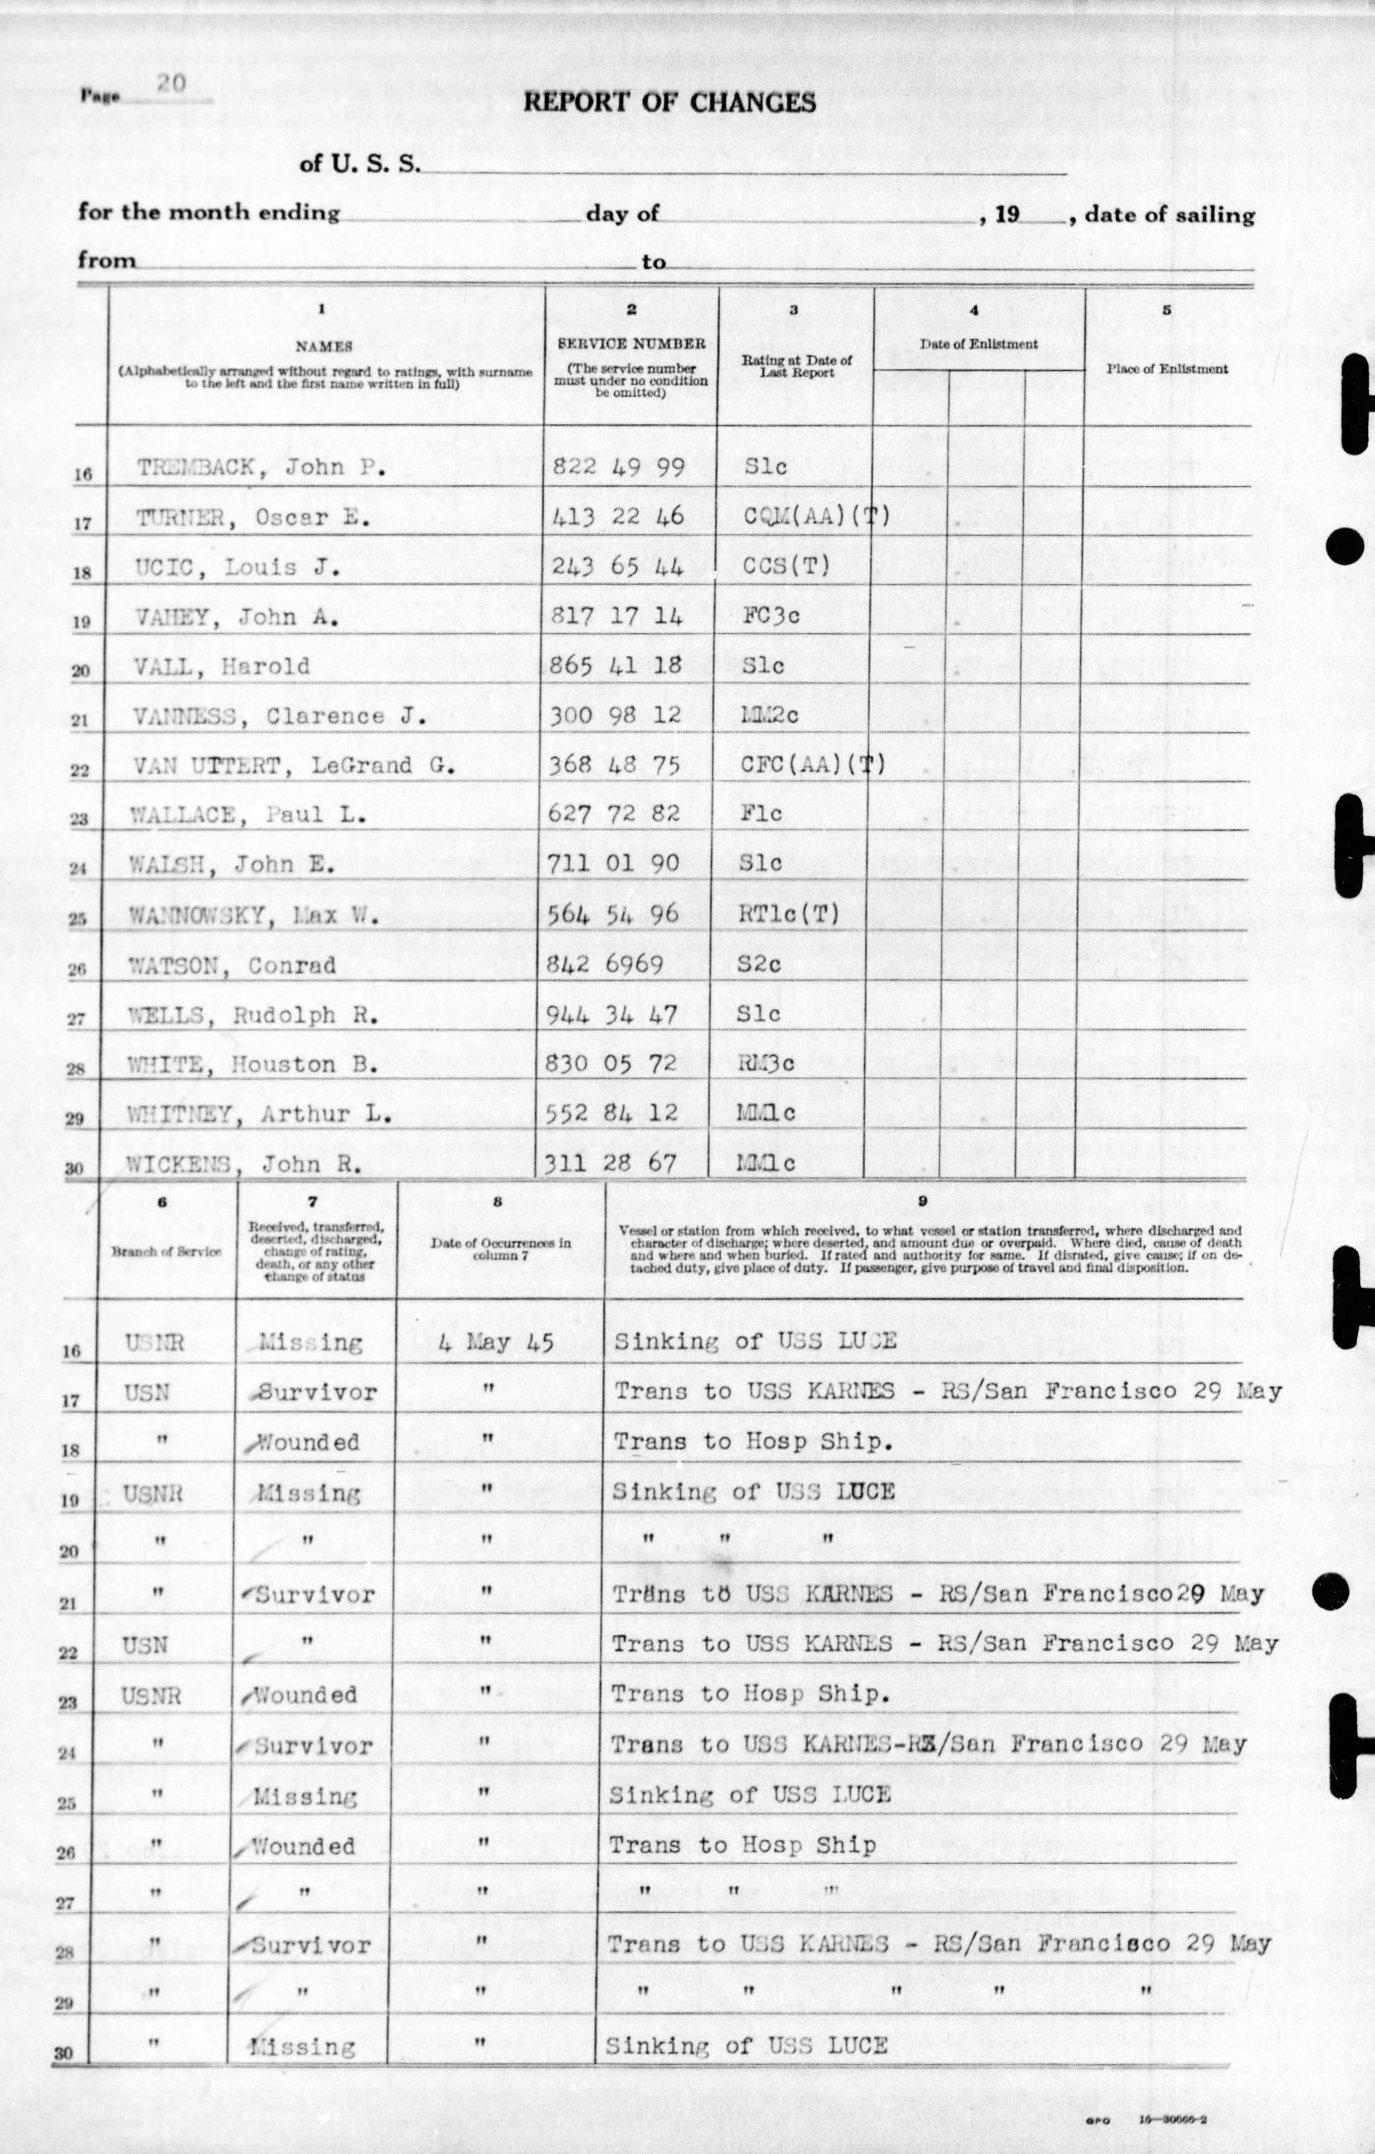 USS Luce final muster list dated June 19, 1945 after the ship was sunk May 4, 1945. Page 22 of 25.